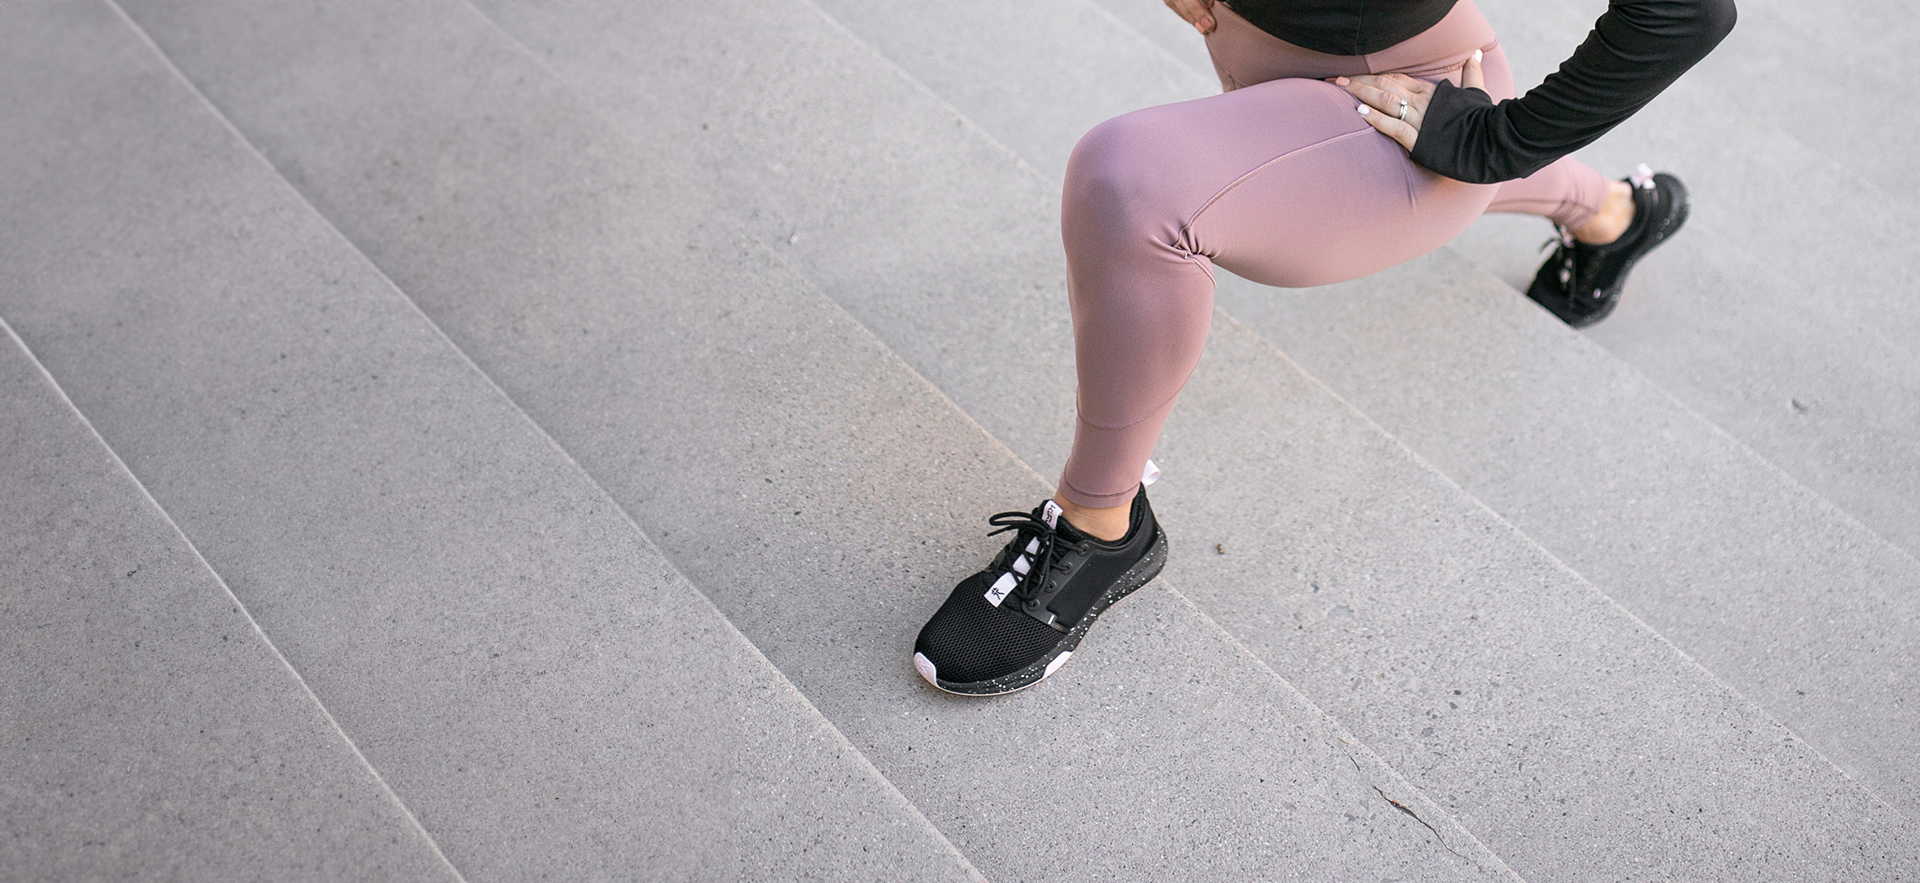 Woman exercising and stretching her legs on stair steps, wearing comfortable shoes by KURU Footwear.